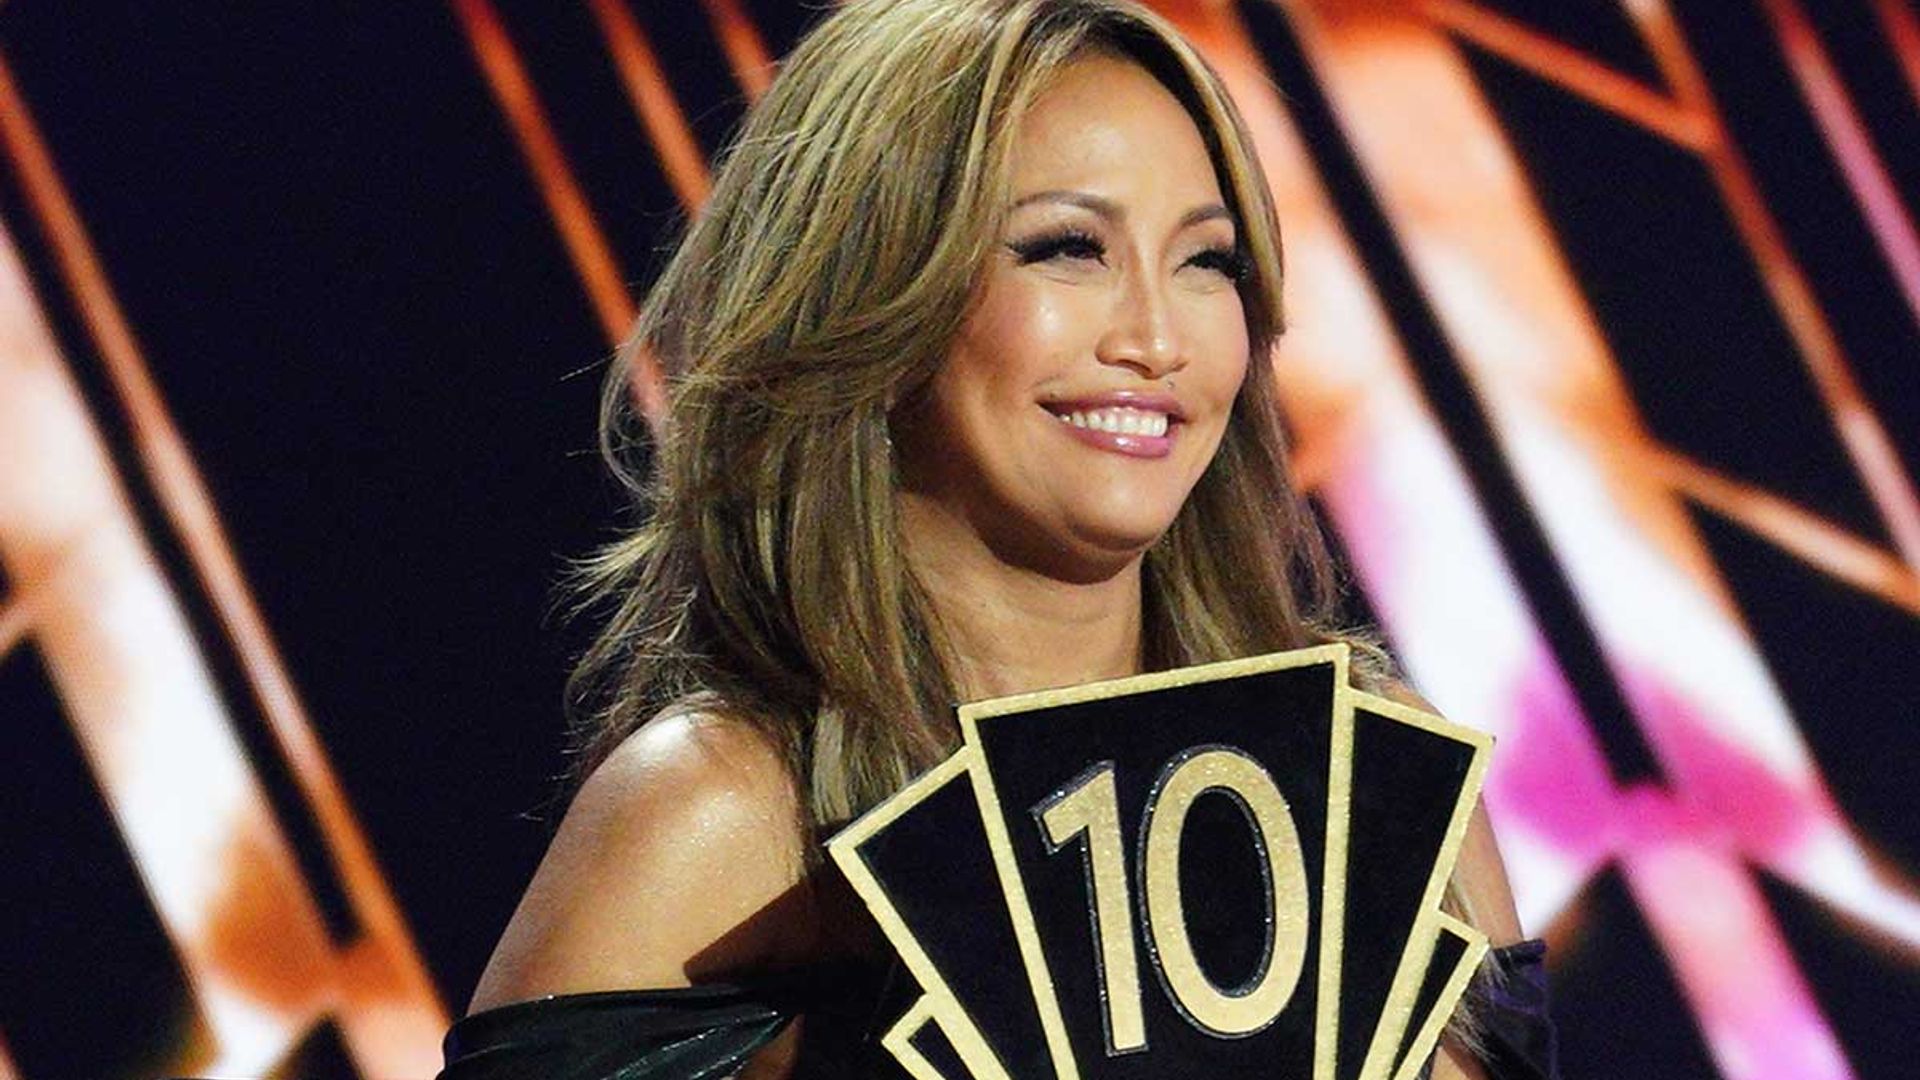 dwts-carrie-ann-inaba